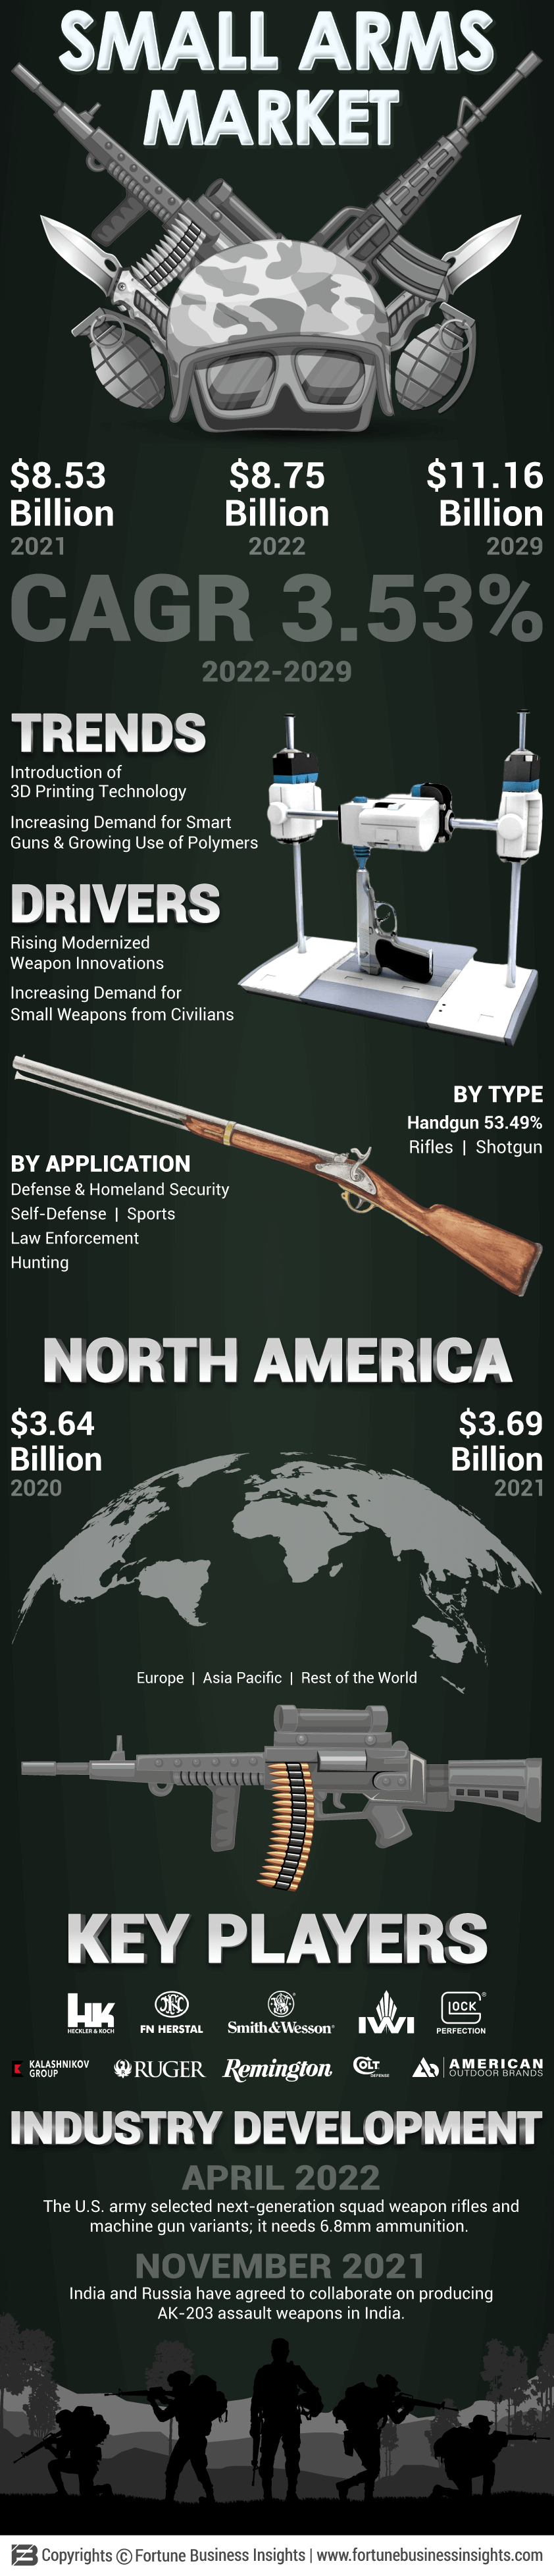 Small Arms Market 